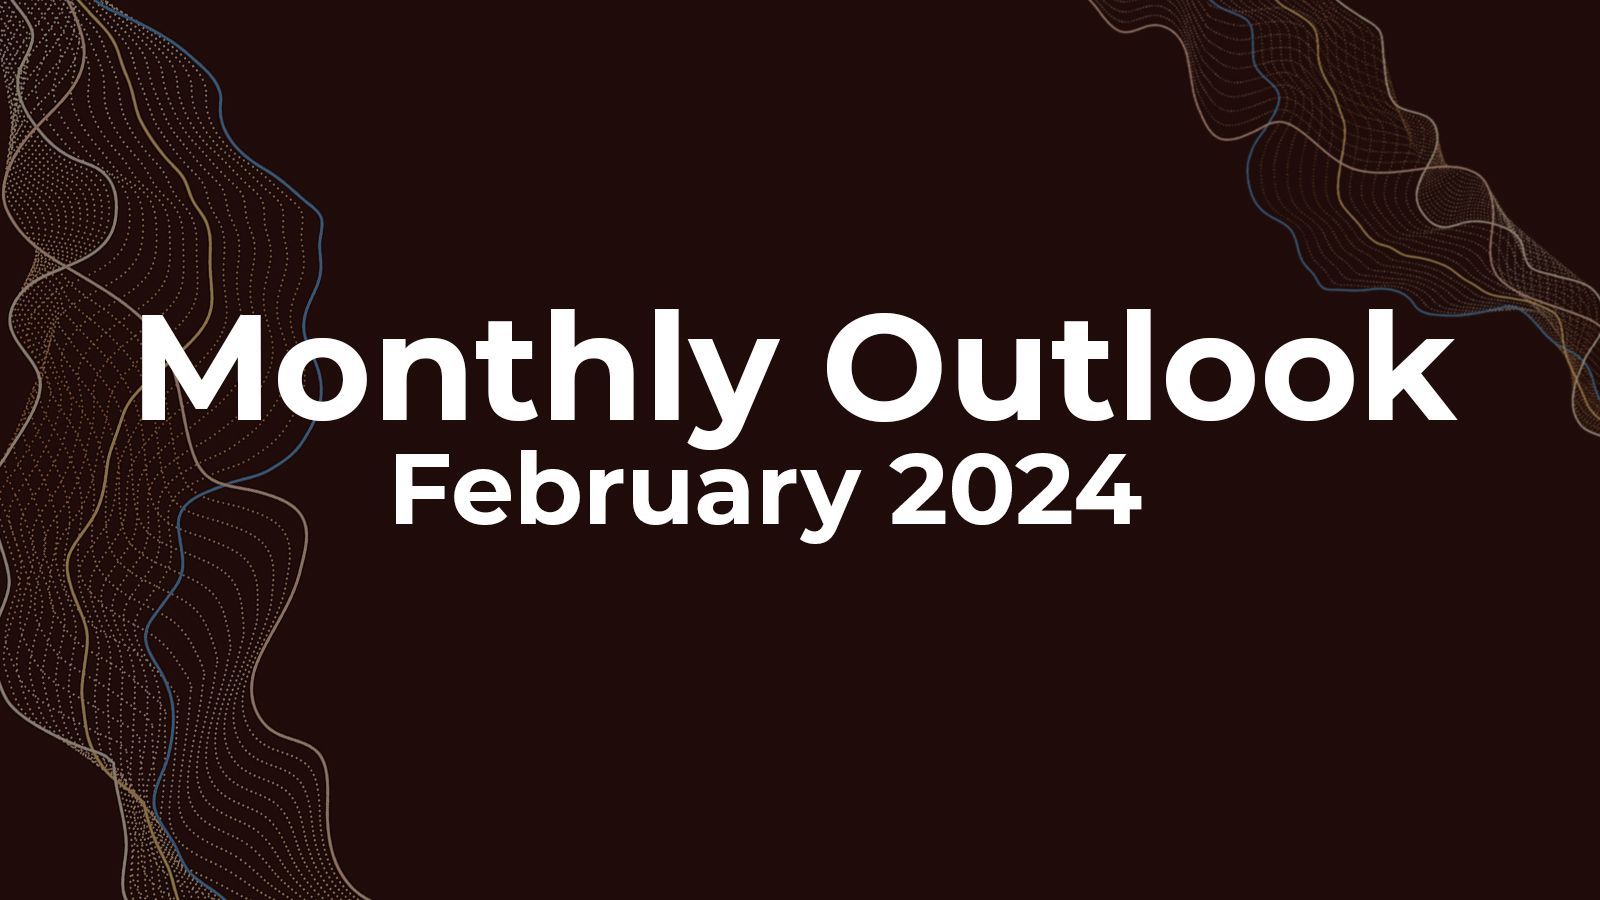 February 2024 Monthly Outlook